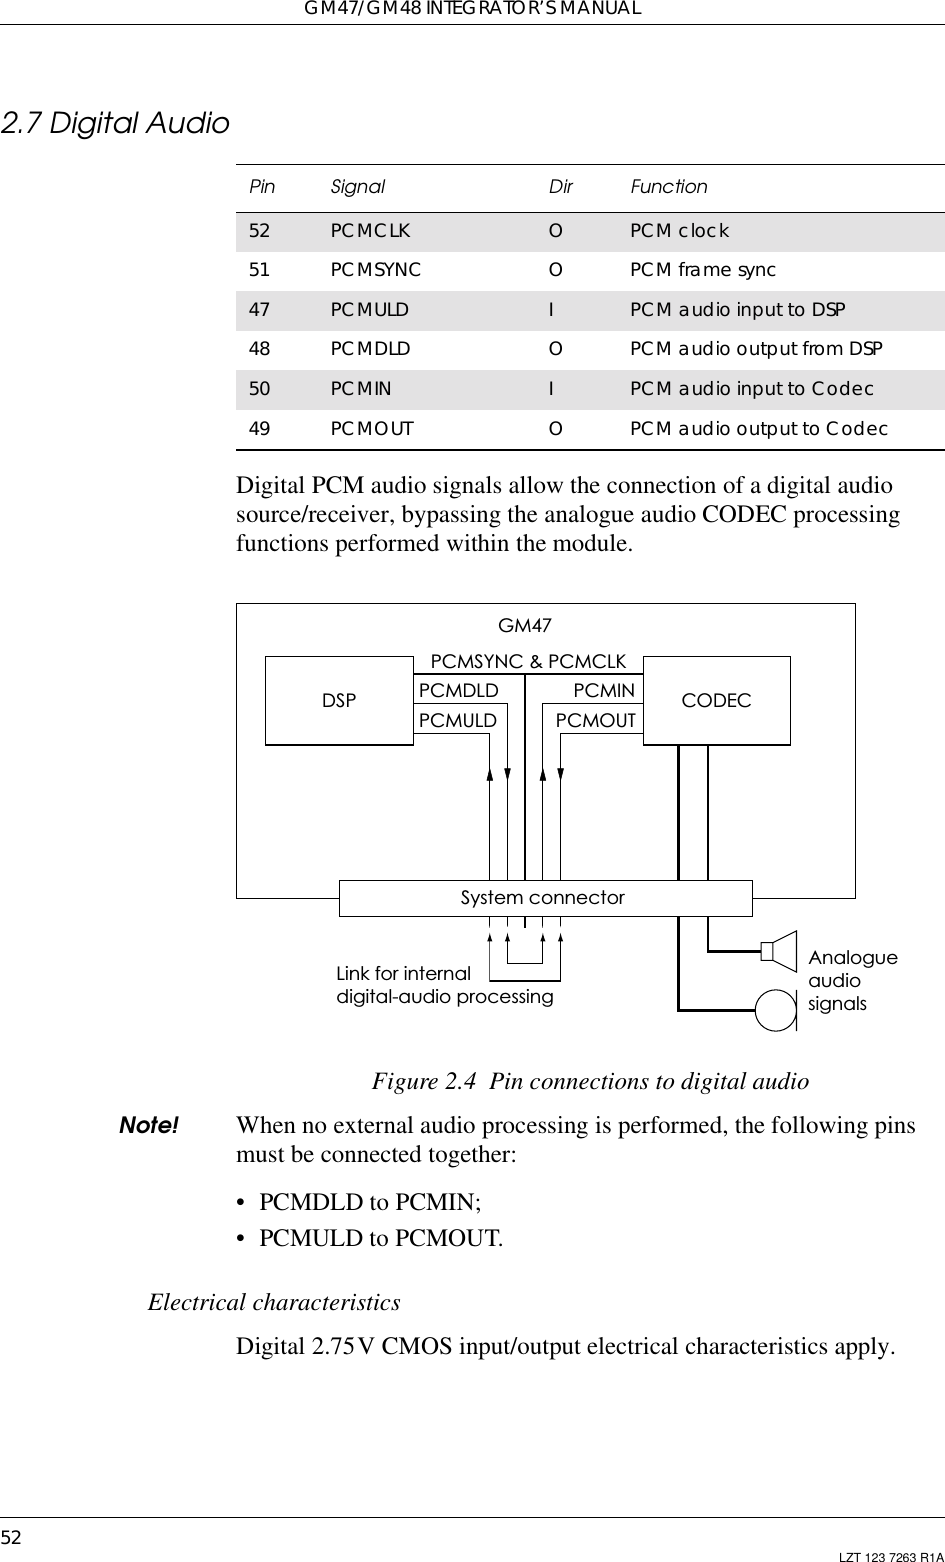 GM47/GM48 INTEGRATOR’S MANUAL52 LZT 123 7263 R1A2.7 Digital AudioDigital PCM audio signals allow the connection of a digital audiosource/receiver, bypassing the analogue audio CODEC processingfunctions performed within the module.Figure 2.4 Pin connections to digital audioNote! When no external audio processing is performed, the following pinsmust be connected together:•PCMDLDtoPCMIN;• PCMULD to PCMOUT.Electrical characteristicsDigital 2.75V CMOS input/output electrical characteristics apply.Pin Signal Dir Function52 PCMCLK OPCM clock51 PCMSYNC OPCM frame sync47 PCMULD IPCM audio input to DSP48 PCMDLD OPCM audio output from DSP50 PCMIN IPCM audio input to Codec49 PCMOUT OPCM audio output to CodecDSP CODECPCMSYNC &amp; PCMCLKAnalogueaudiosignalsPCMINPCMOUTPCMDLDPCMULDLink for internaldigital-audio processingGM47System connector